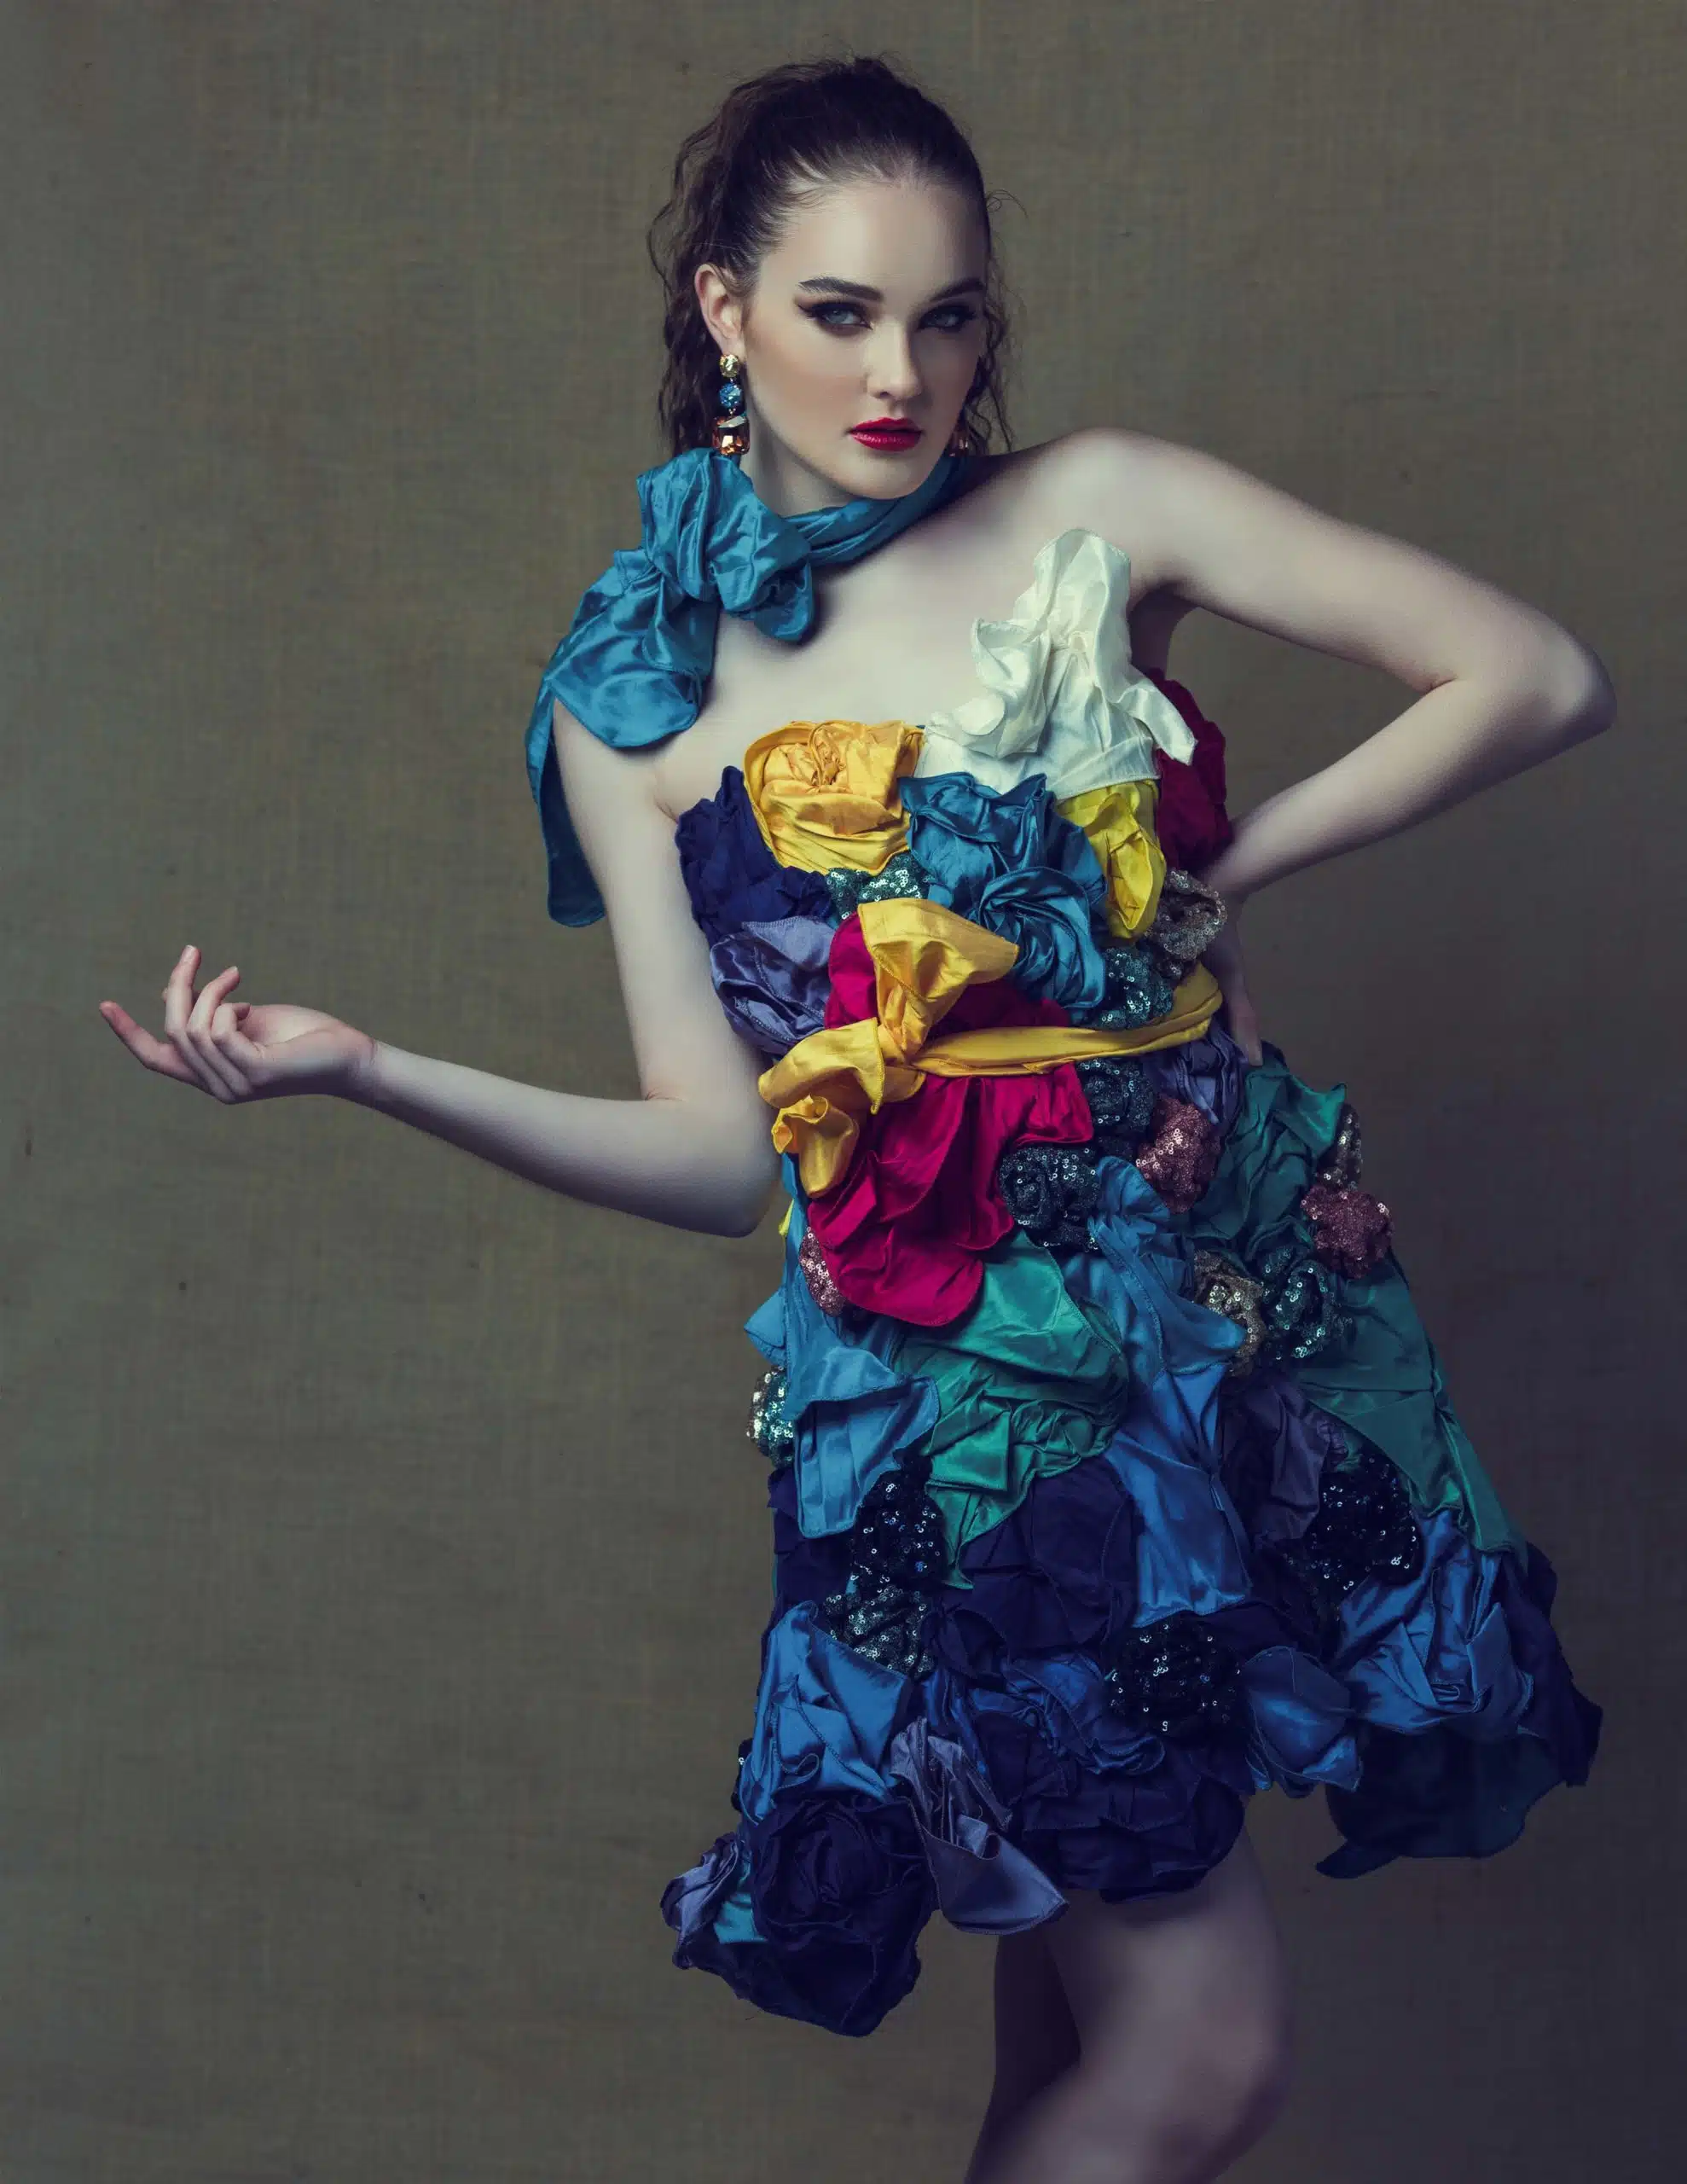 The Sustainability project: floral gown wonderland in colour